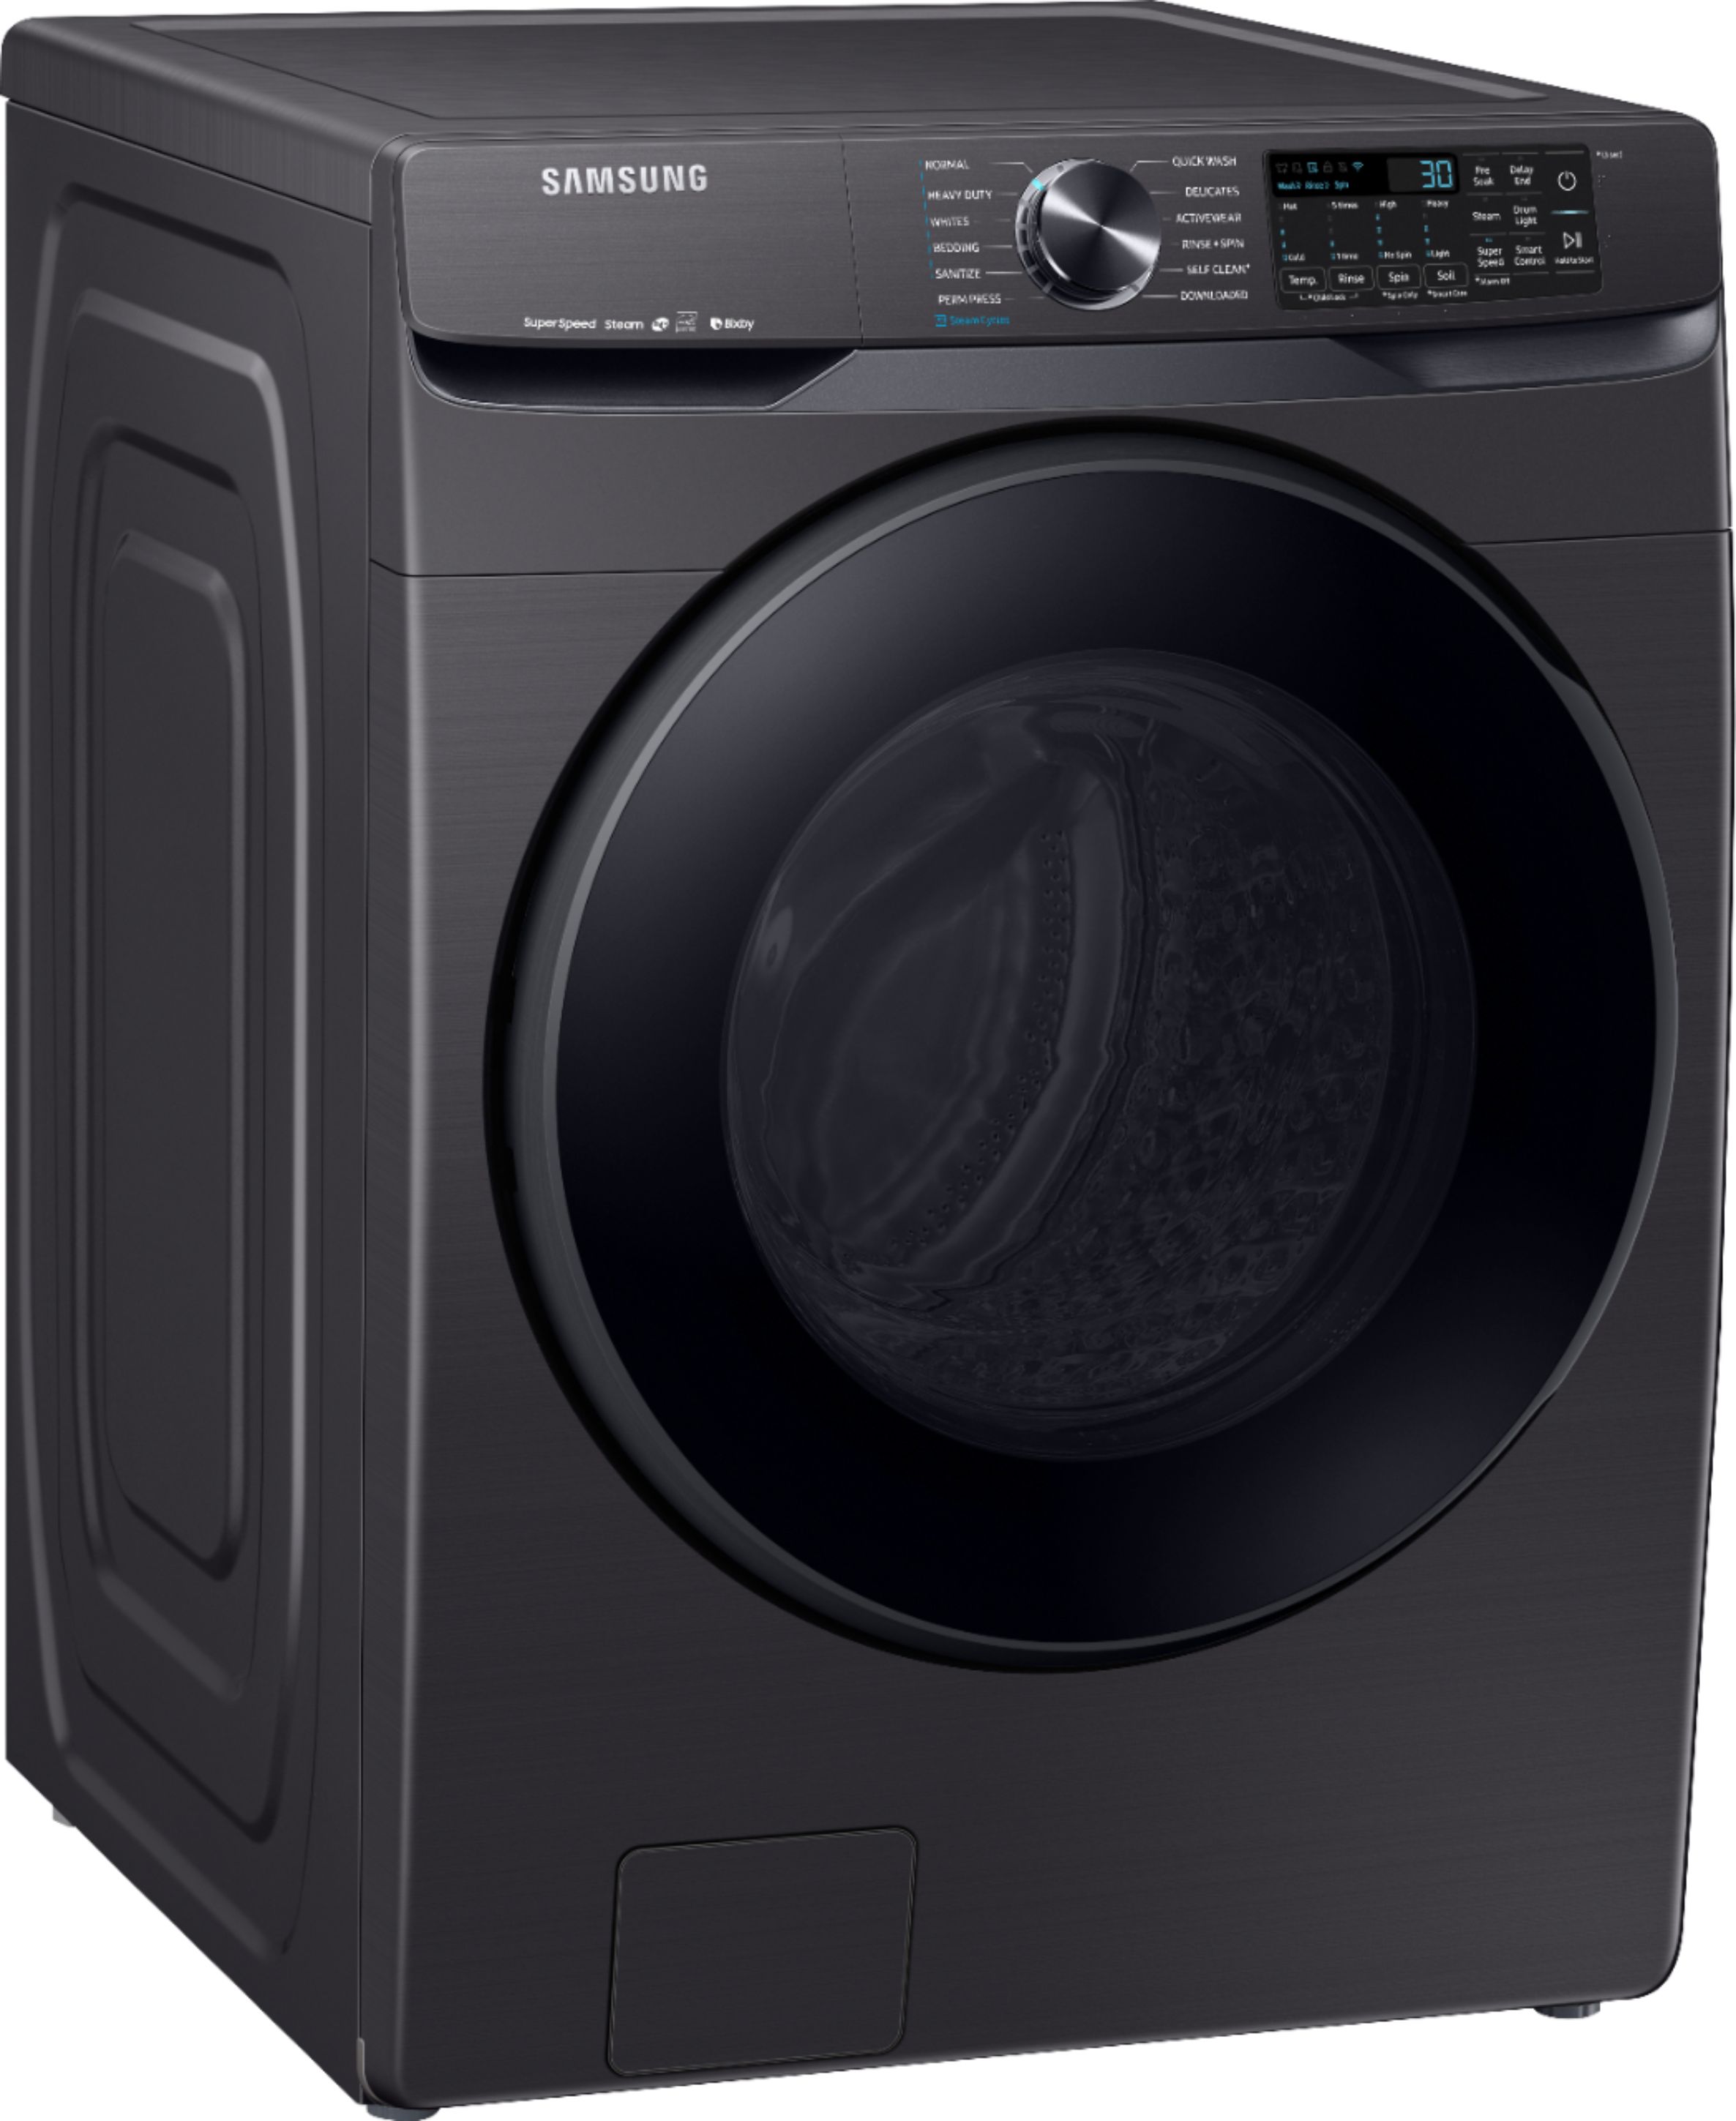 Angle View: Samsung WF50A8800AV - Washing machine - Wi-Fi - width: 27 in - depth: 33.5 in - height: 38.7 in - front loading - 5 cu. ft - 1200 rpm - brushed black